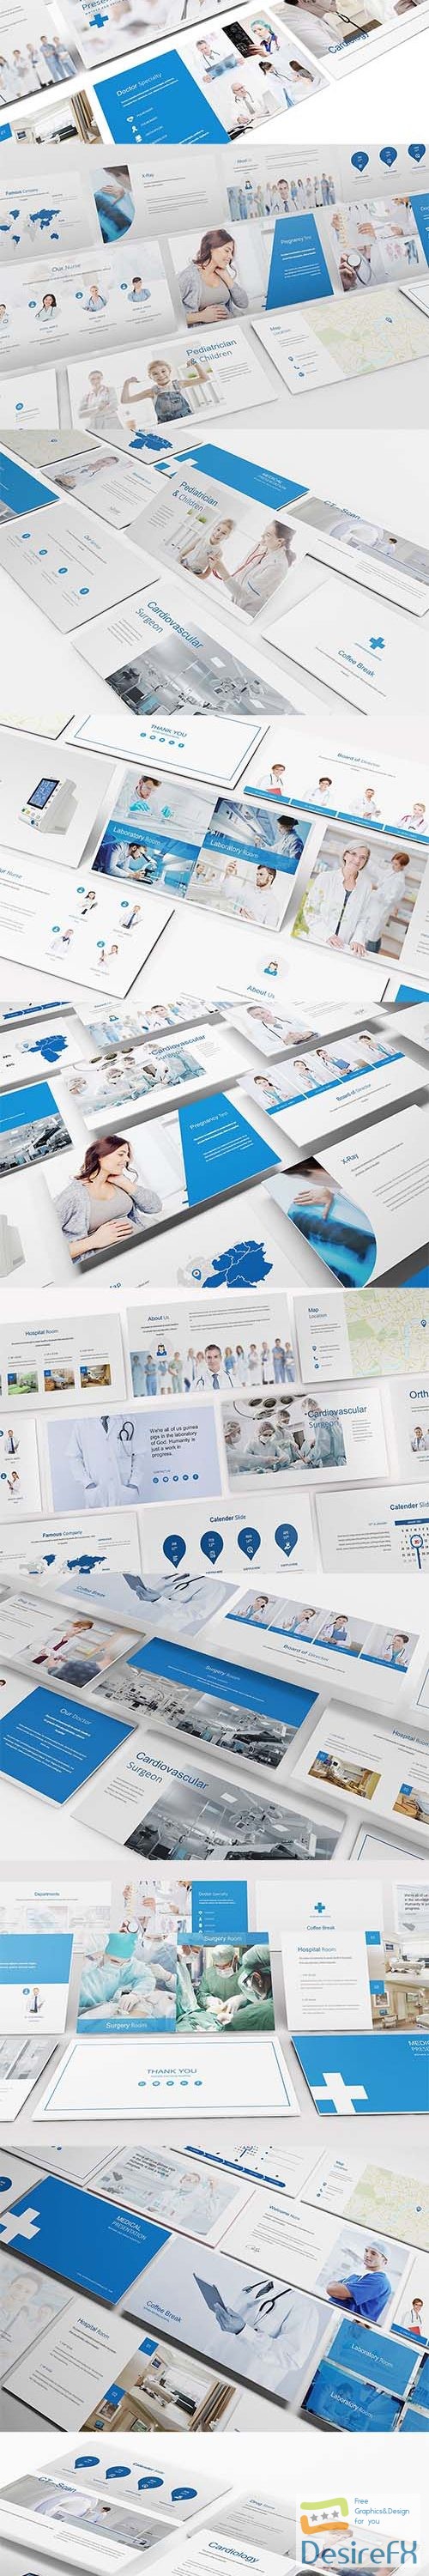 Medical and Hospital Powerpoint Template